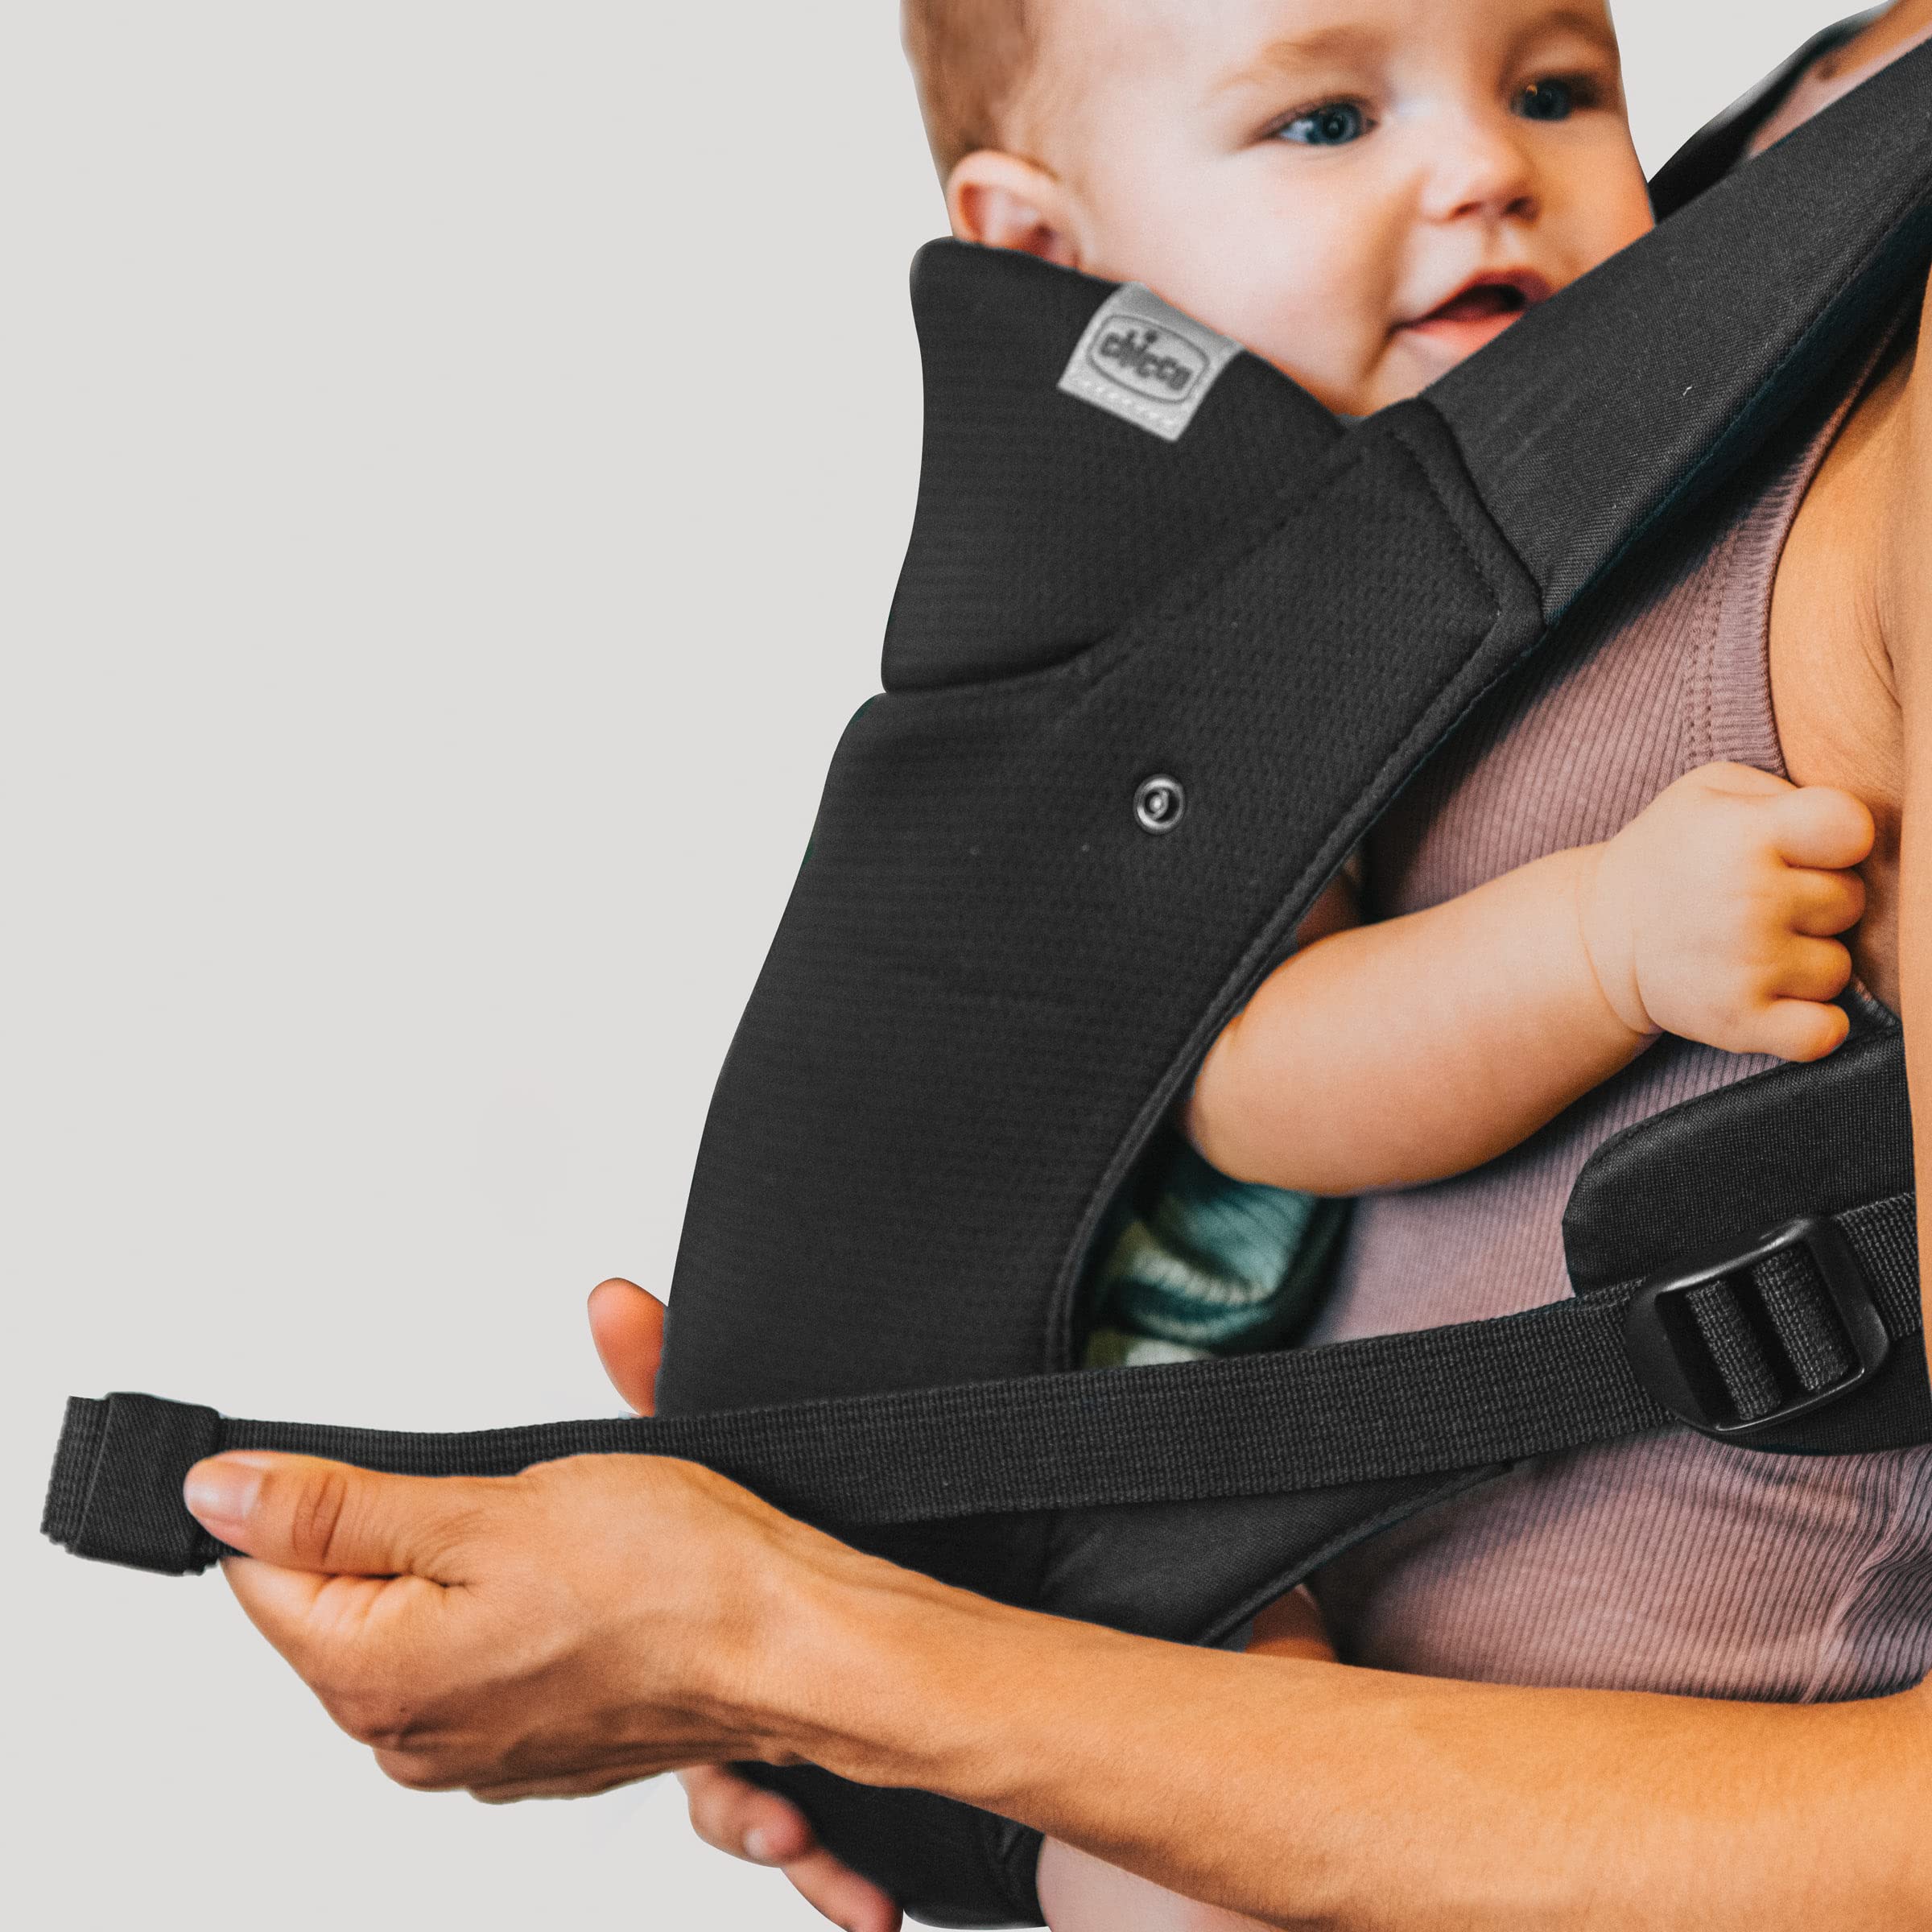 Chicco SnugSupport 4-in-1 Infant Carrier, Front and Back Carry Positions, Infant Backpack, Baby Carrier Newborn to Toddler, for Infants 7.5-33 lbs. | Black/Black